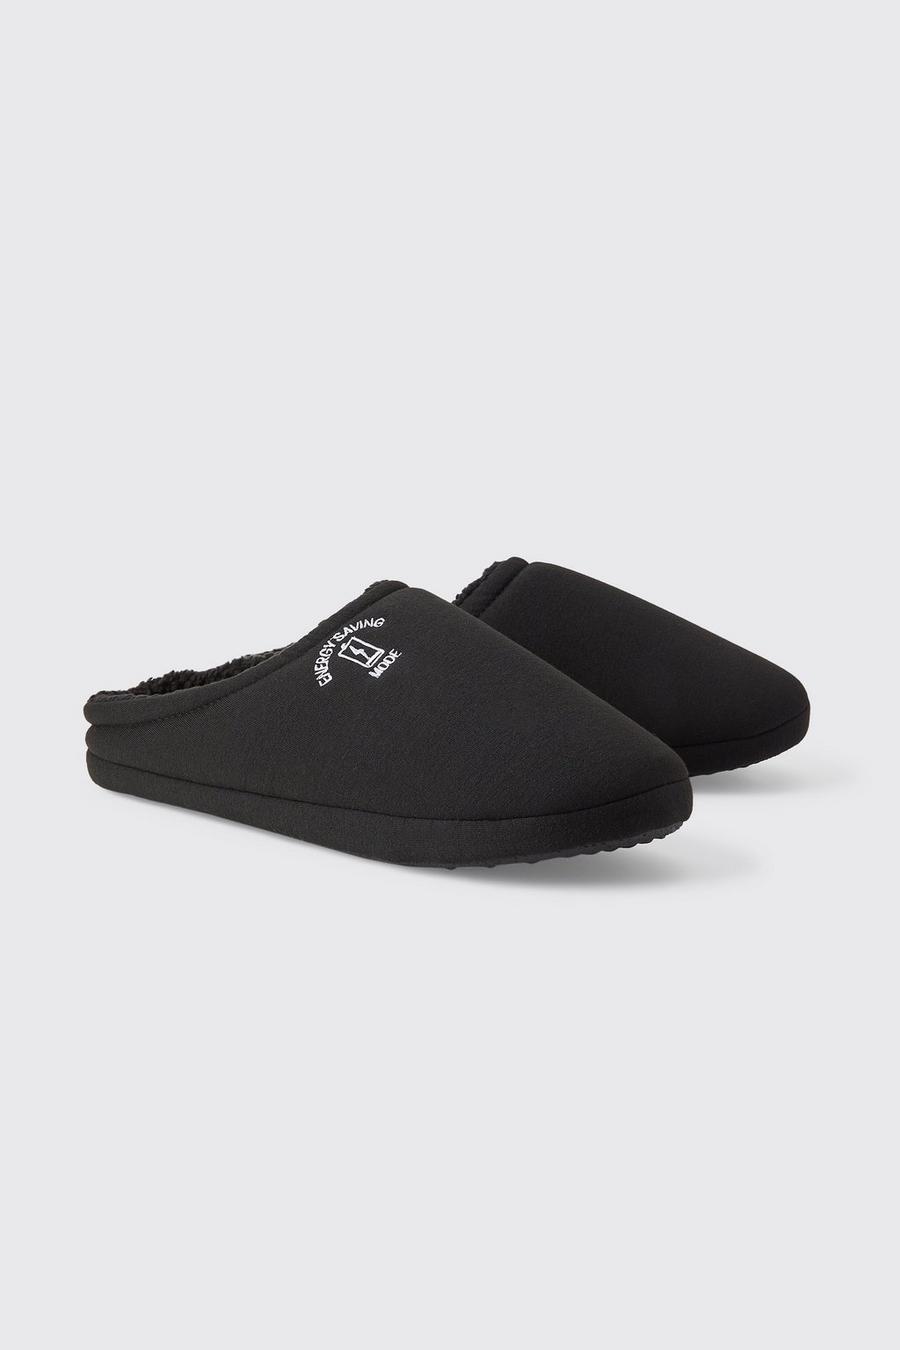 Black Embroidered Jersey Knit Slippers image number 1